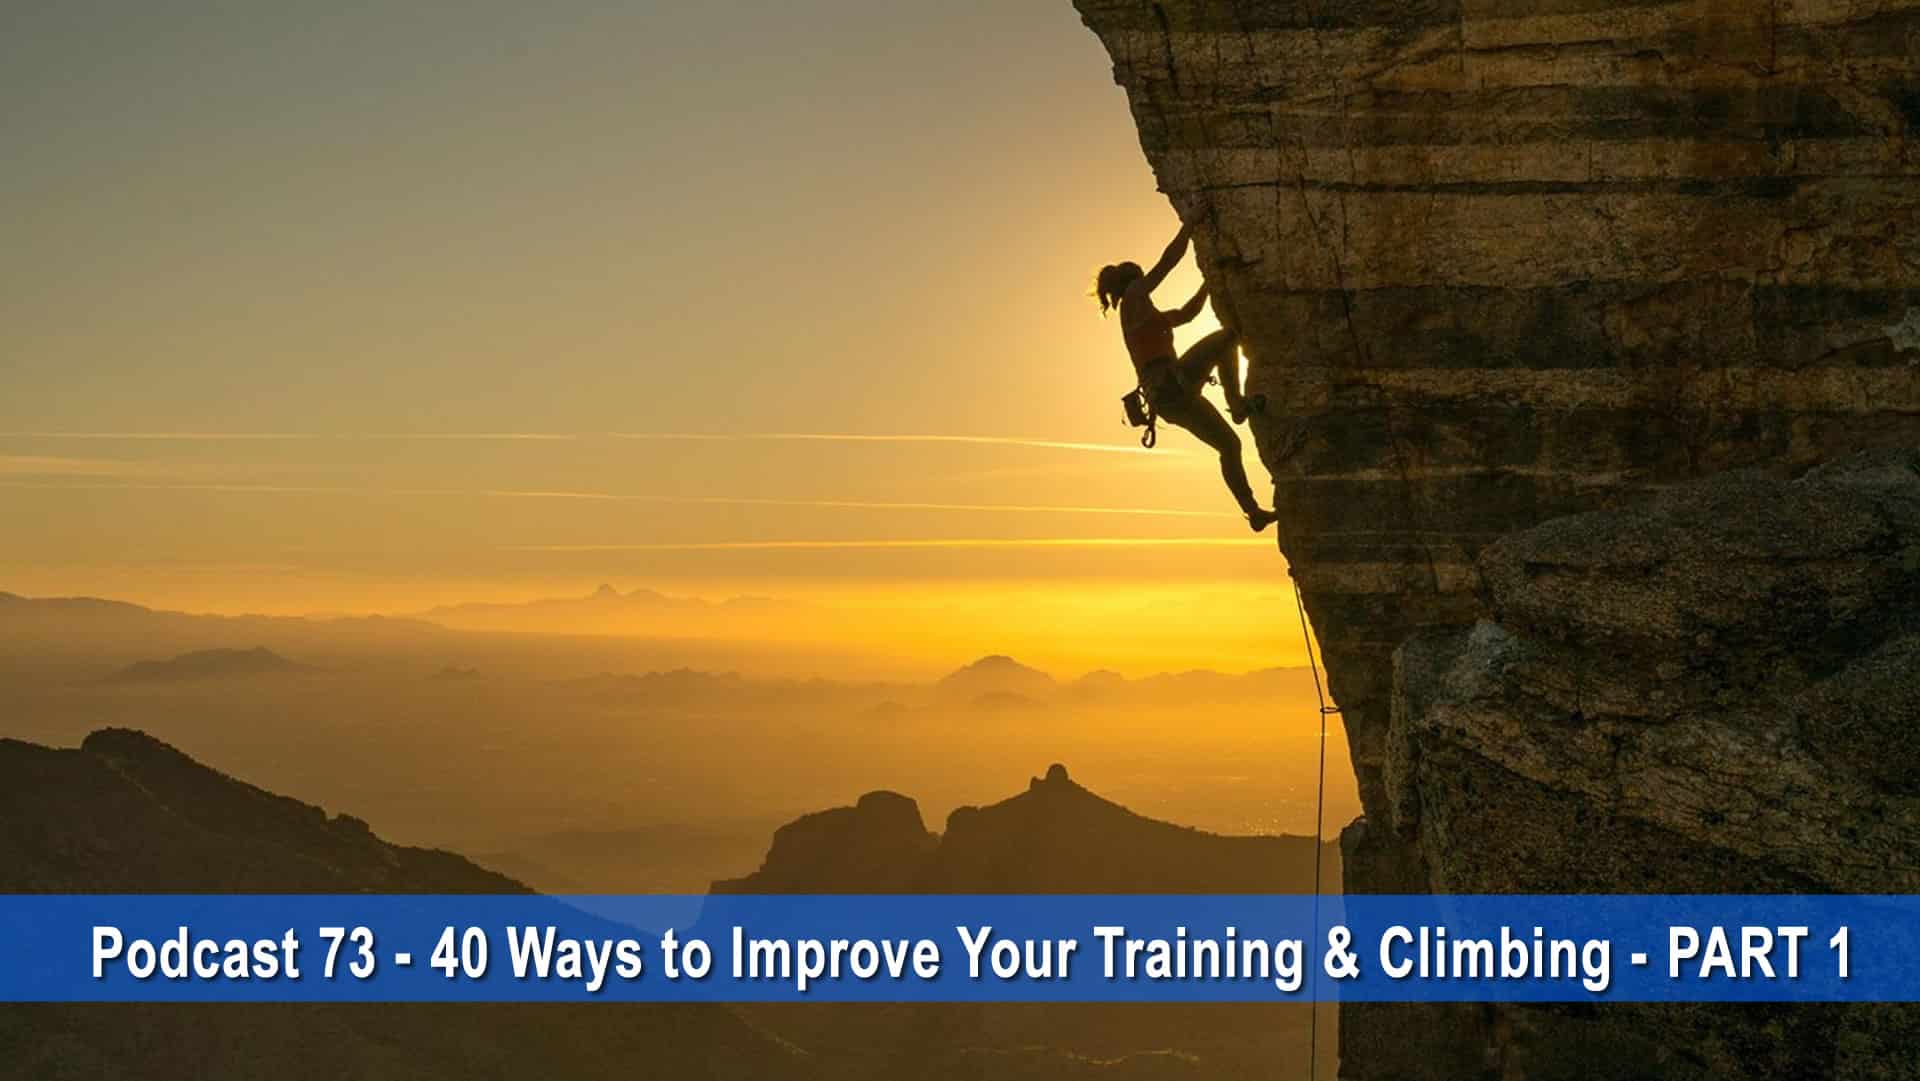 Podcasts #73 & #74 – 40 Ways to Improve Your Training and Climbing!